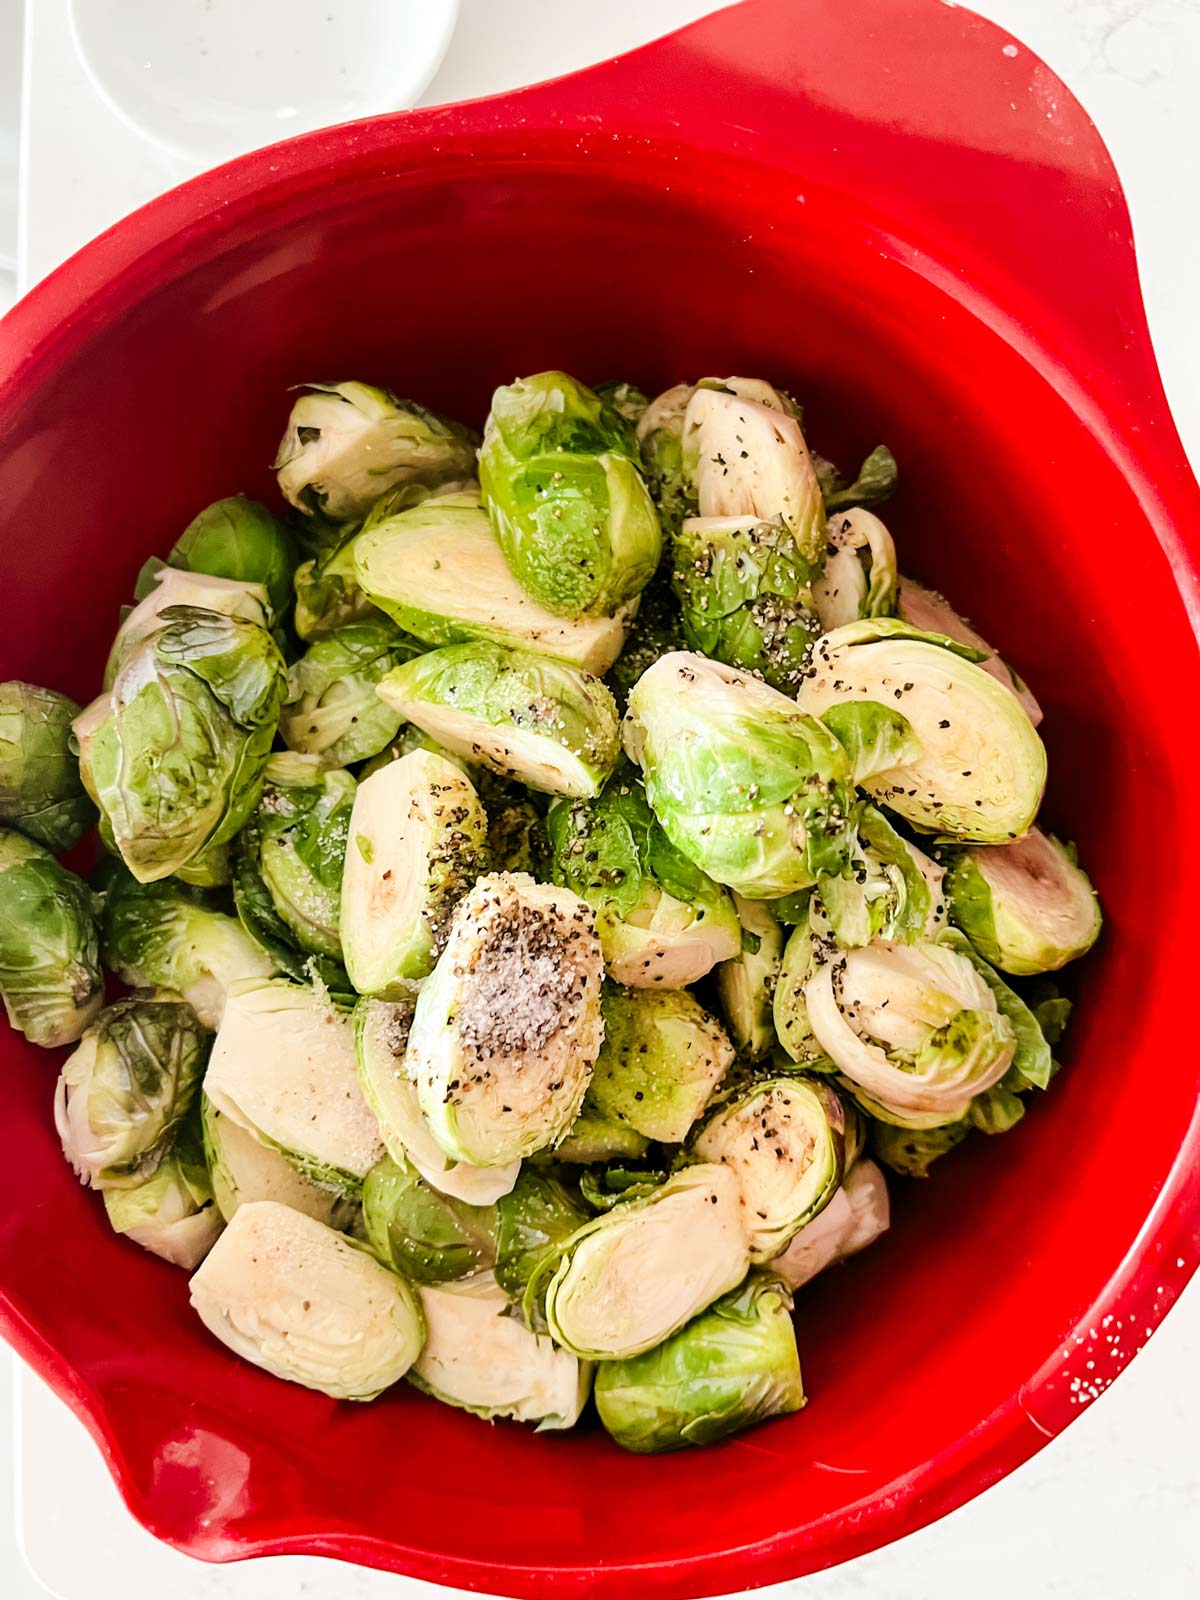 Seasoned brussels sprouts in a red bowl.